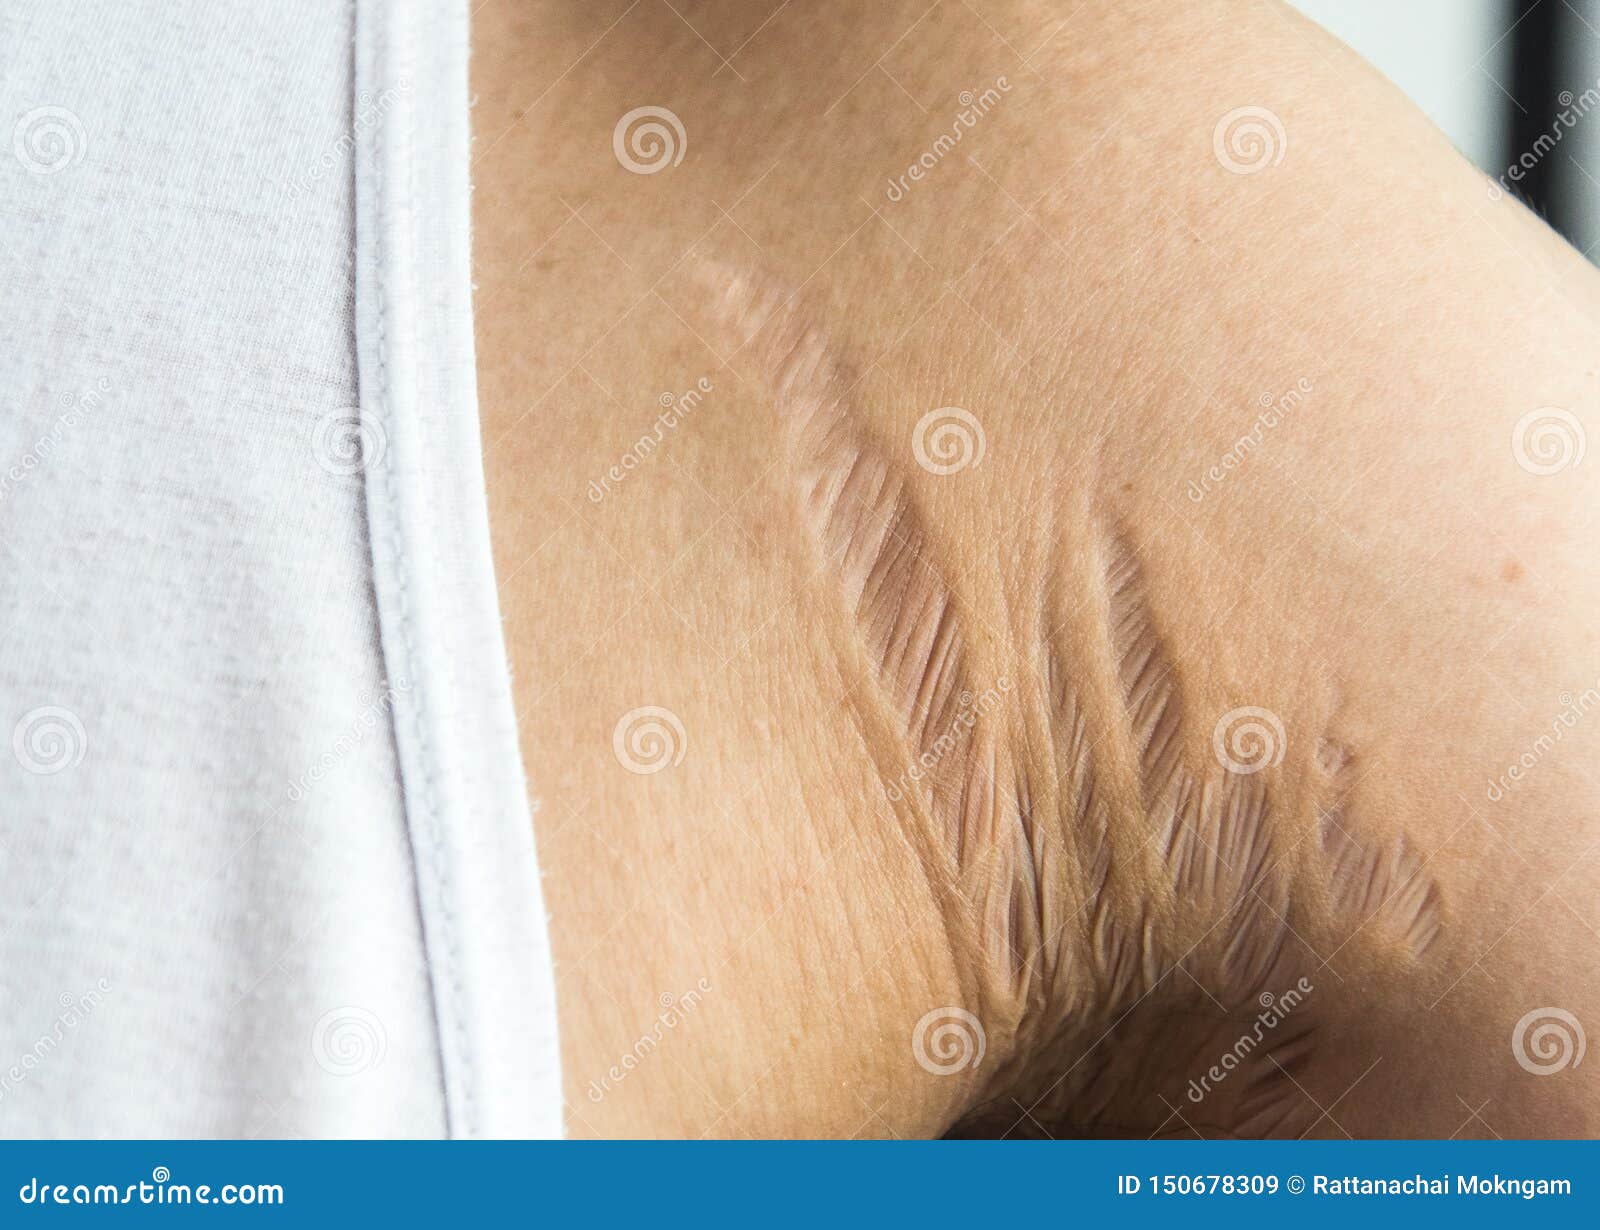 stretch marks on armpit skin area caused by tearing of the dermis layer of the skin prednisolone`s side effect